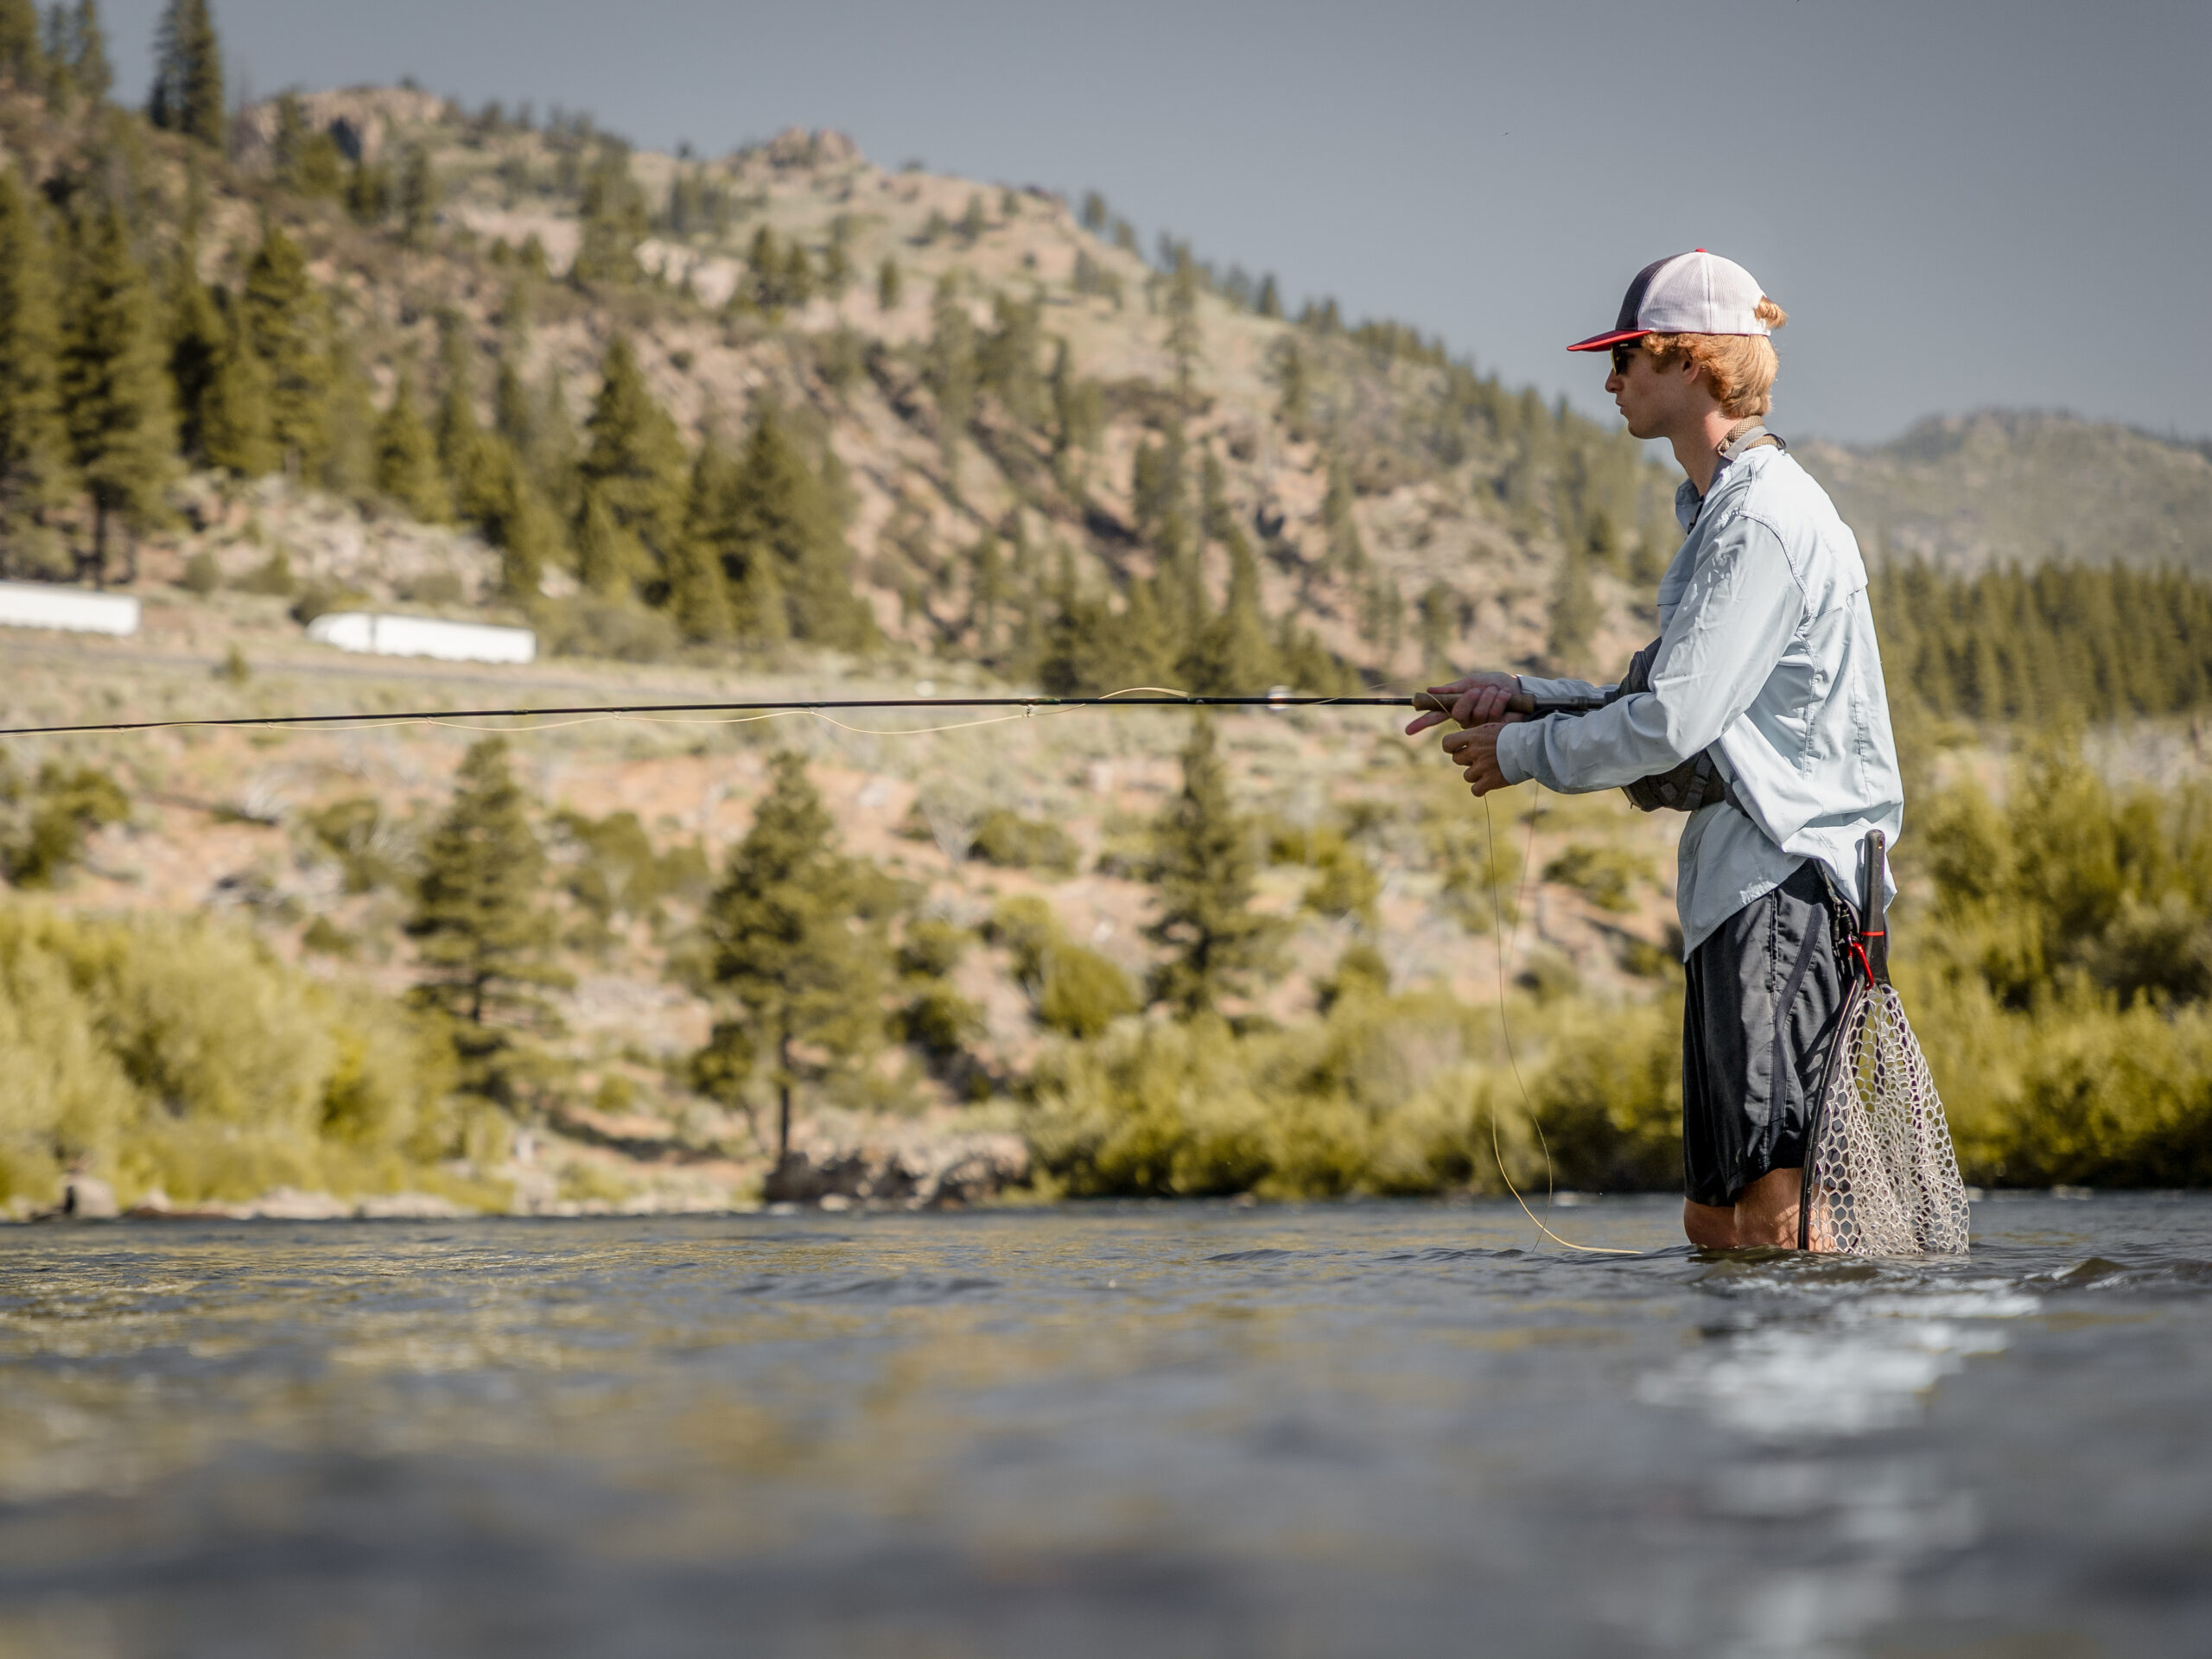 guided fly fishing